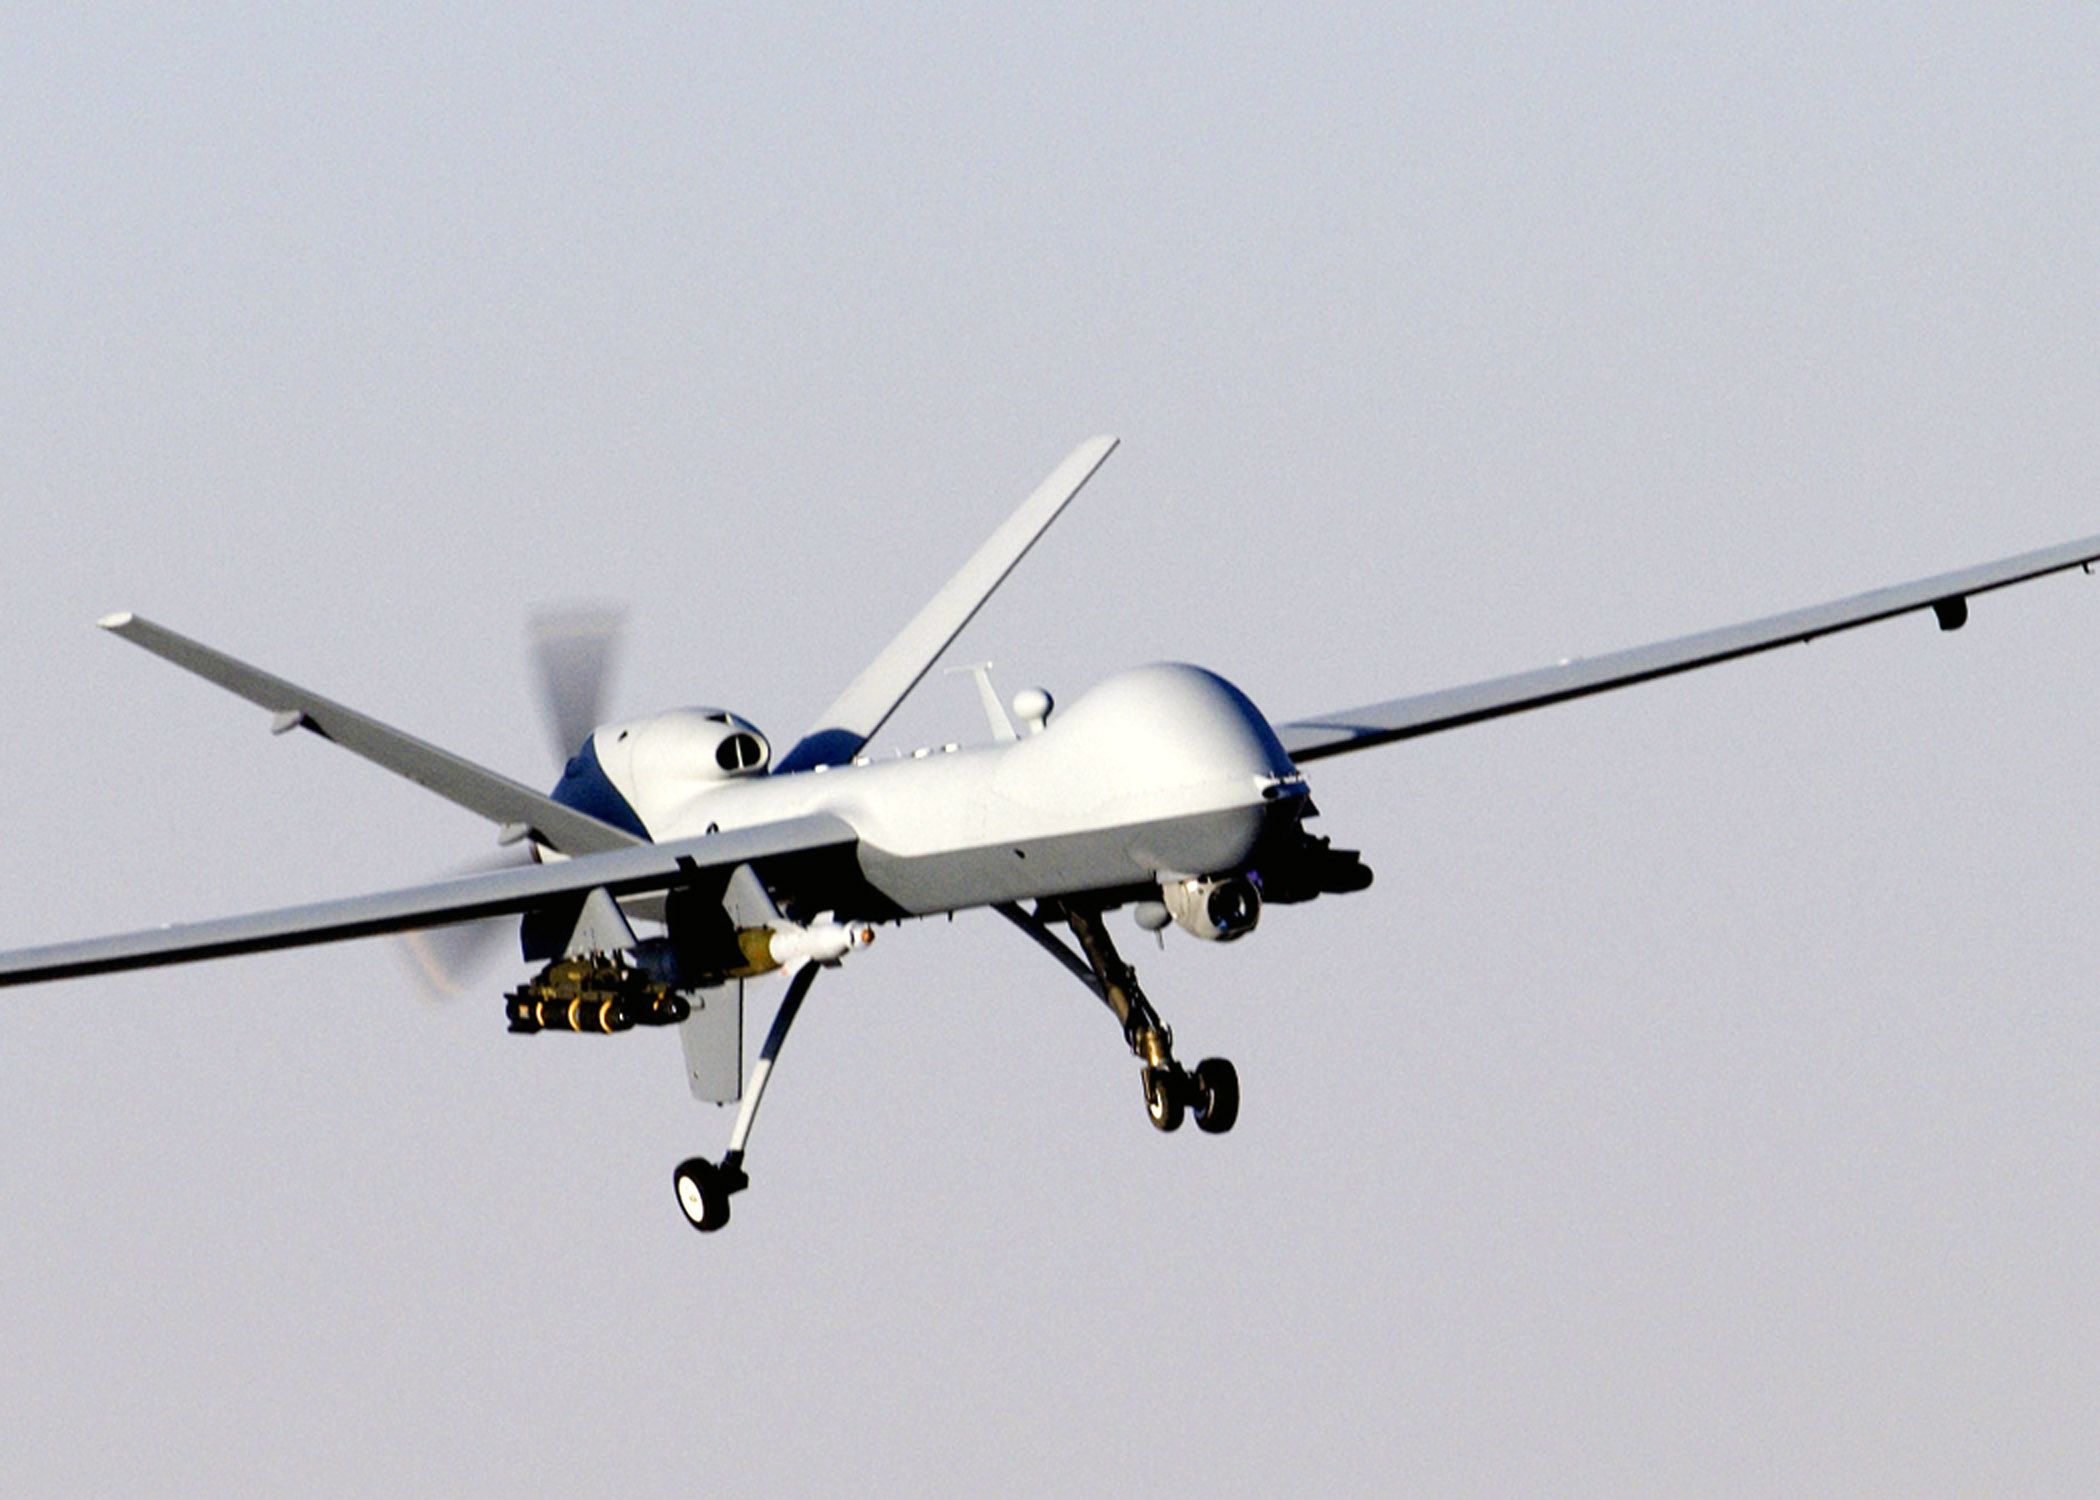 2015 Marked the Worst Year for Drone Crashes the Air Force Has Ever Had